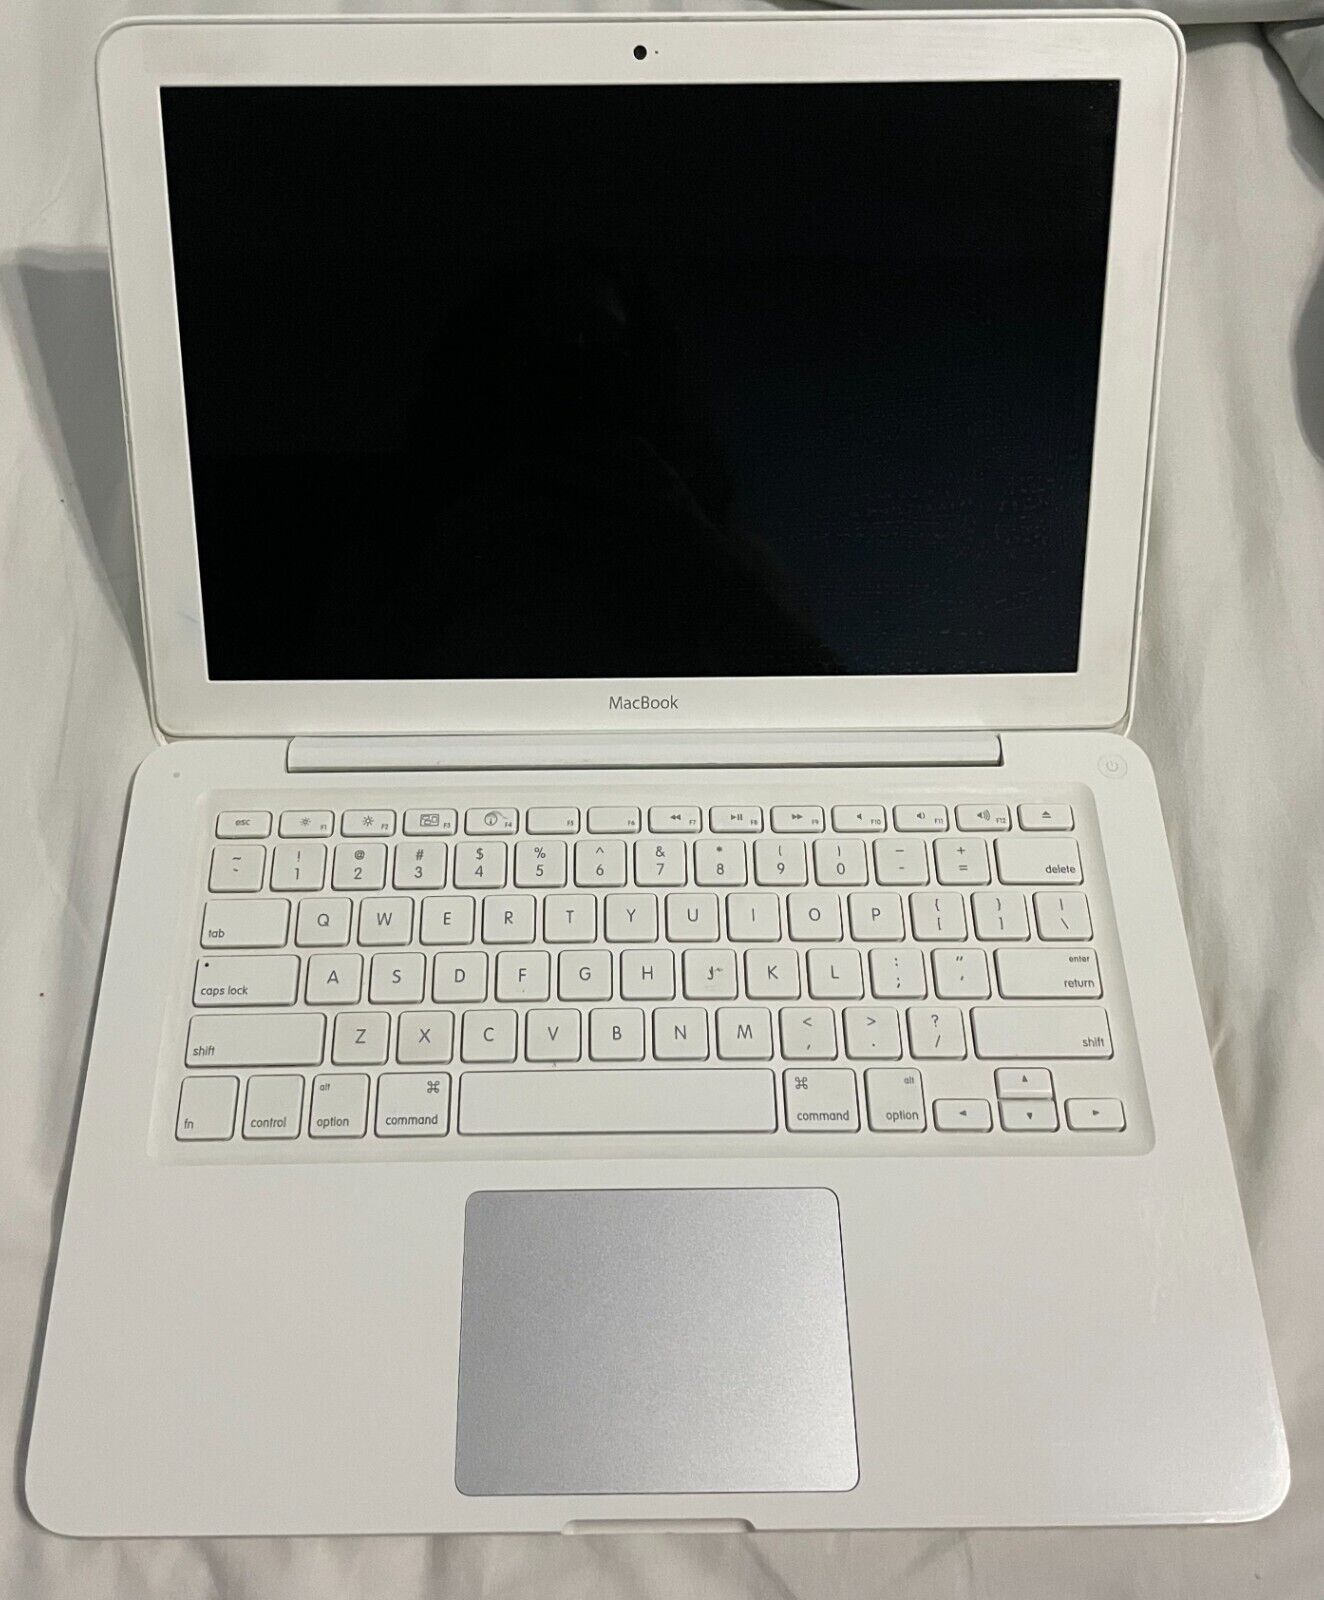 Apple MacBook A1181 13 inch Laptop - MC240LL/A (May, 2009) White Laptop 